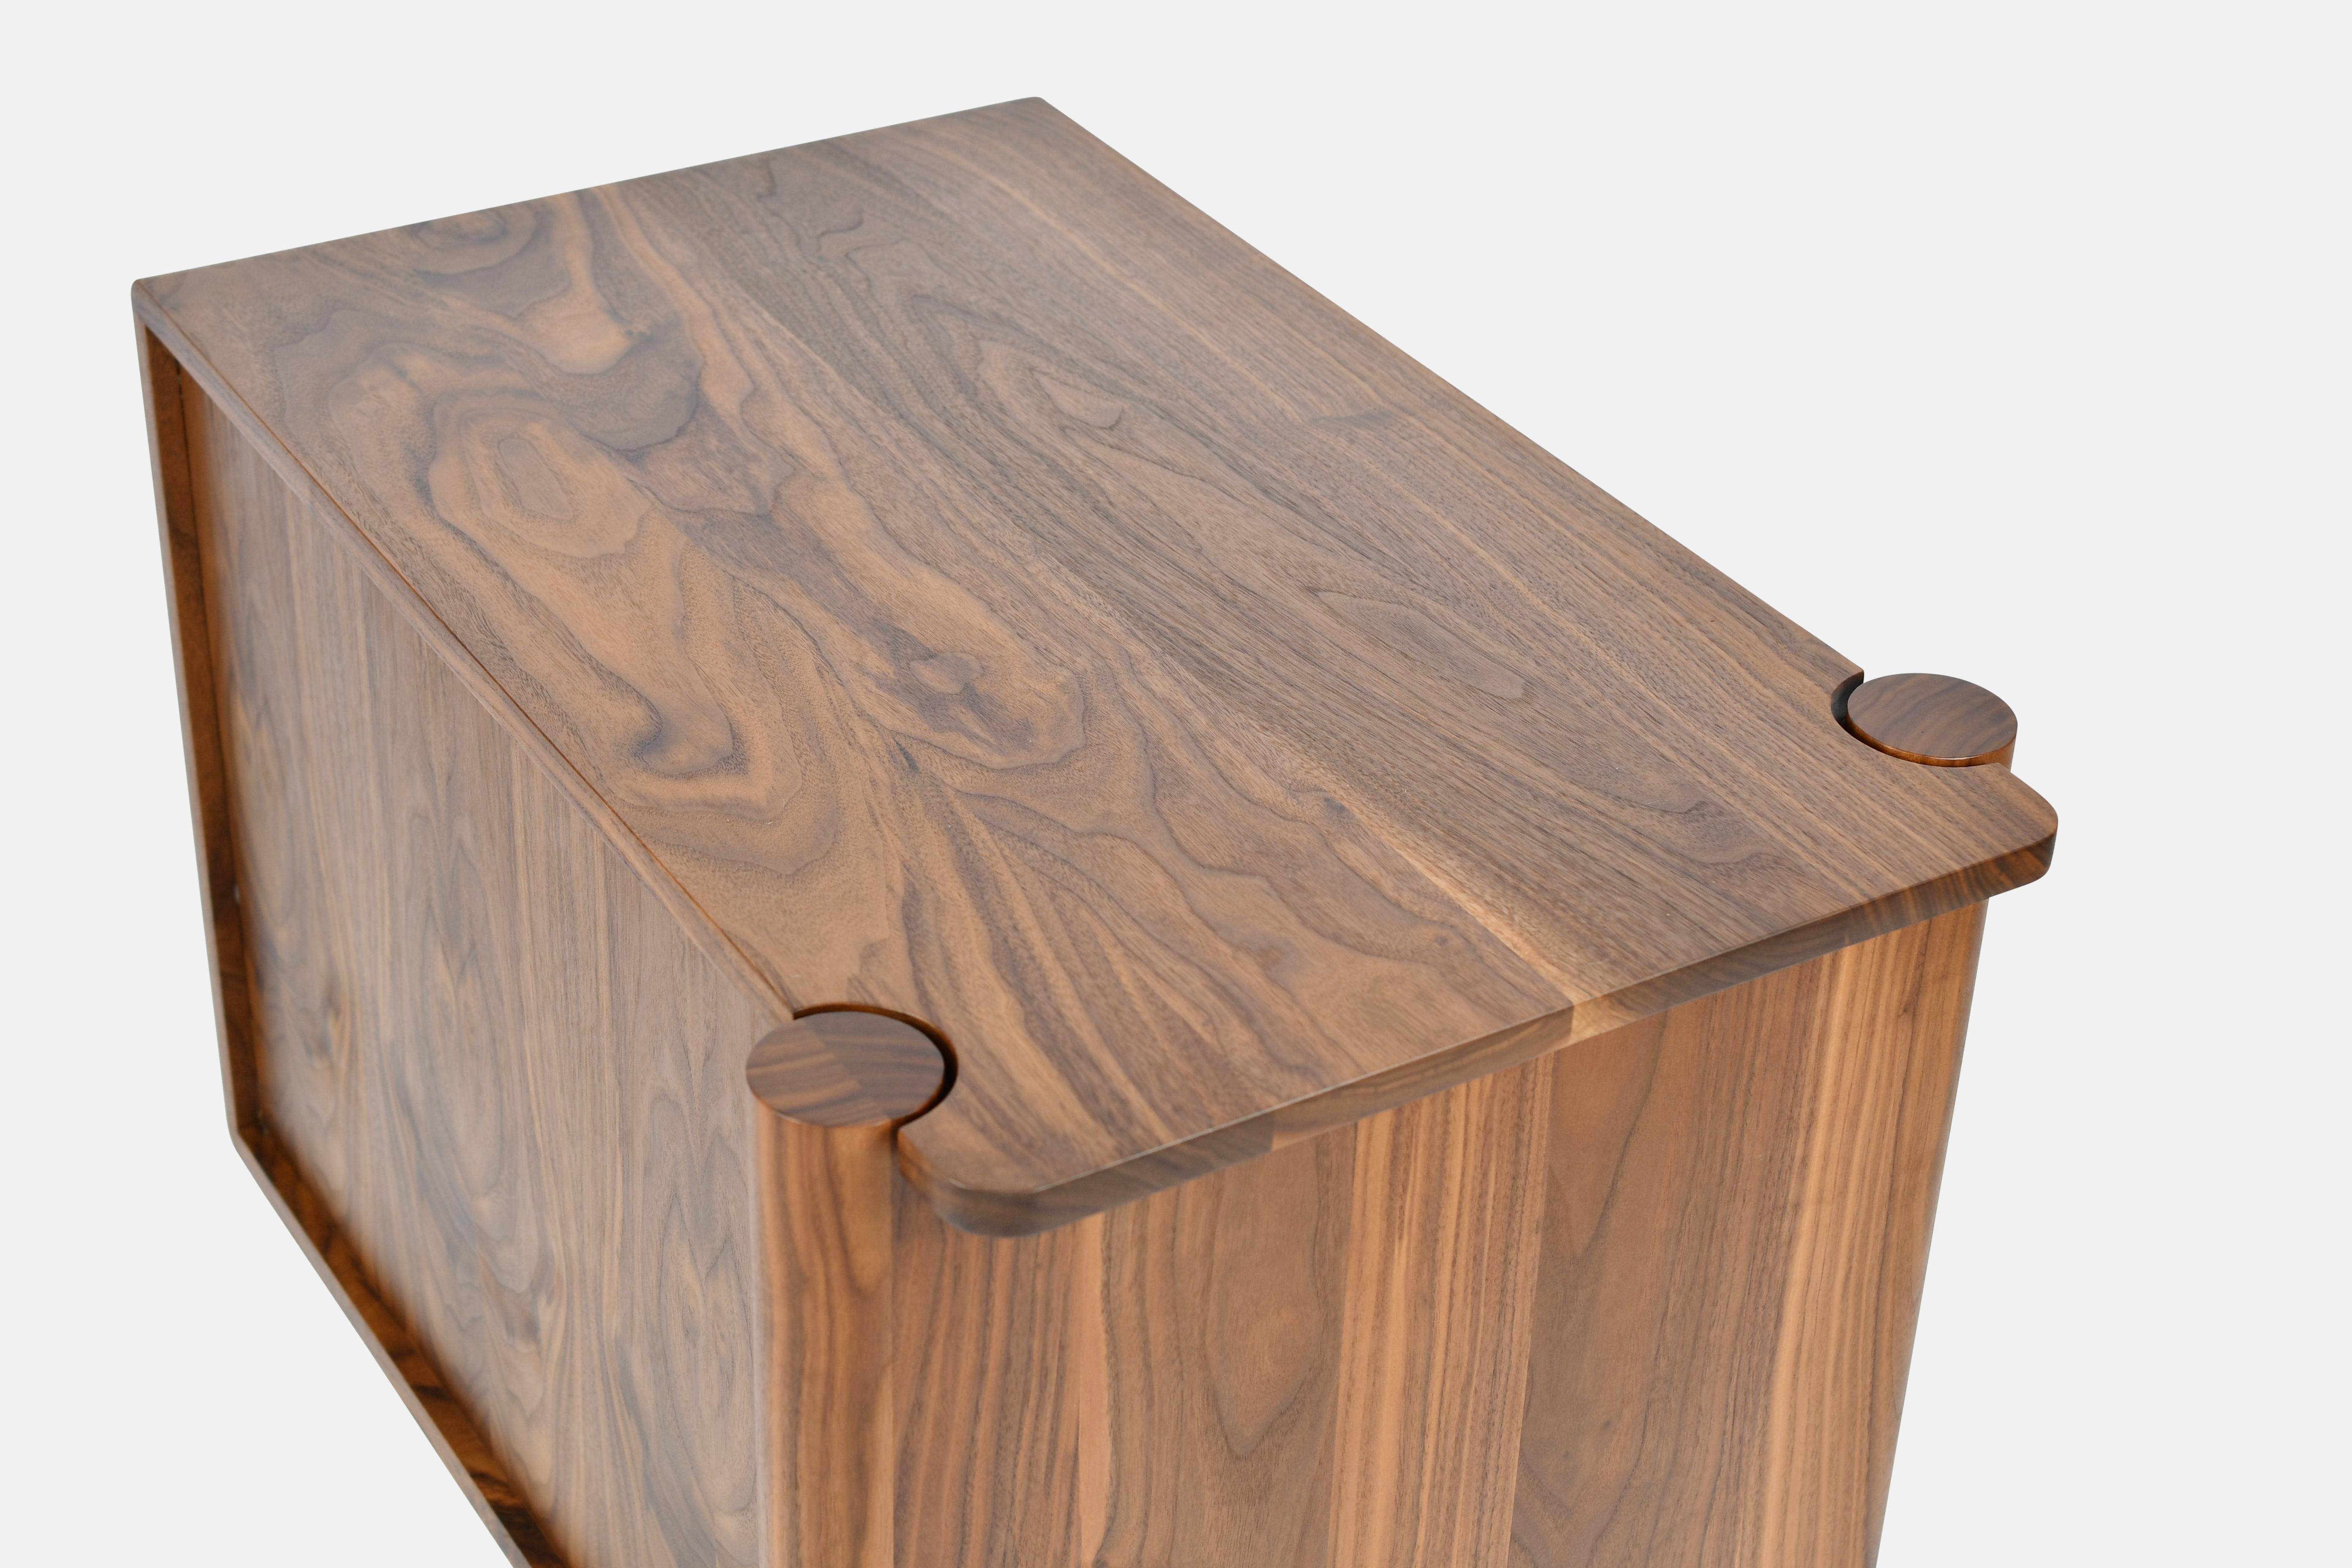 Ash Sulaco Side Table, 1 Drawer For Sale